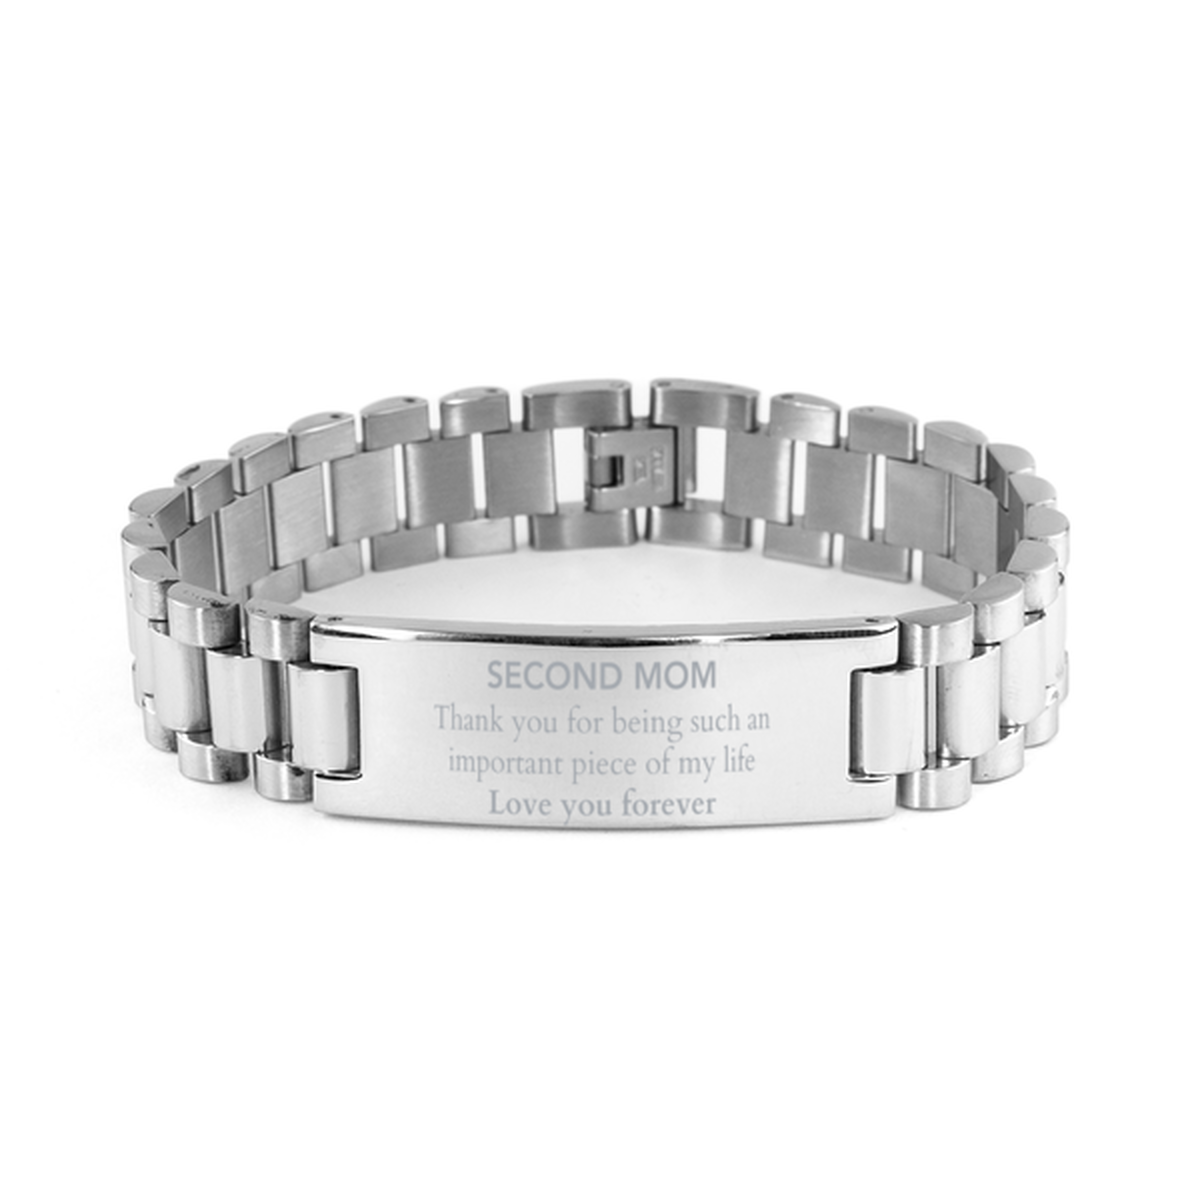 Appropriate Second Mom Ladder Stainless Steel Bracelet Epic Birthday Gifts for Second Mom Thank you for being such an important piece of my life Second Mom Christmas Mothers Fathers Day